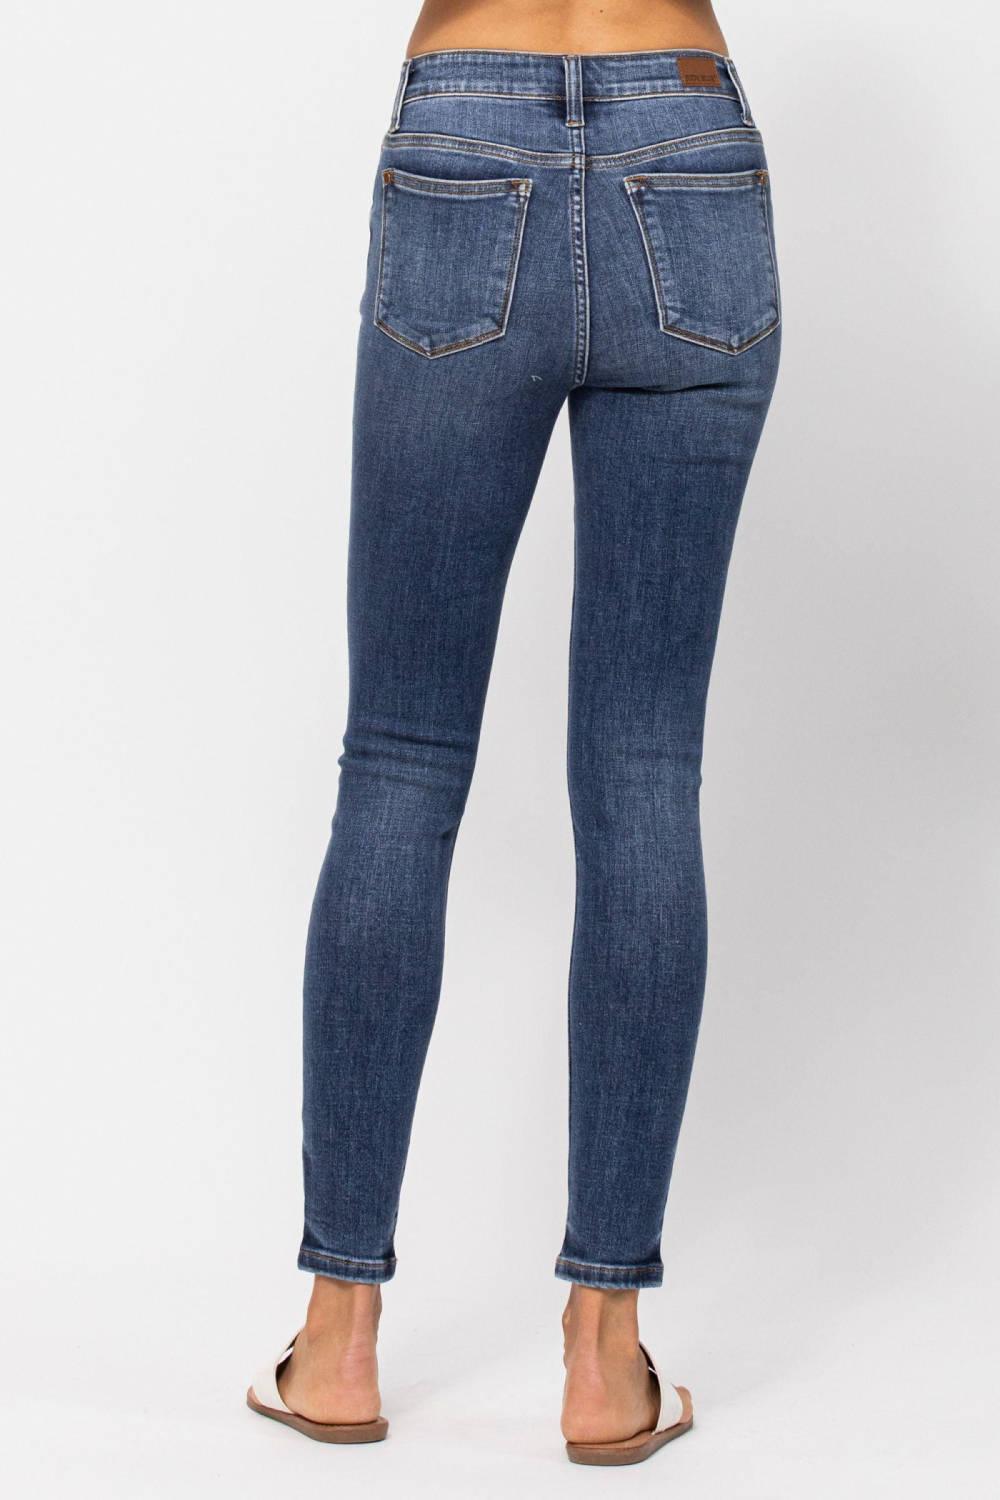 Judy Blue Midrise Crinkle Ankle Skinny Jeans – Strawberry Moon